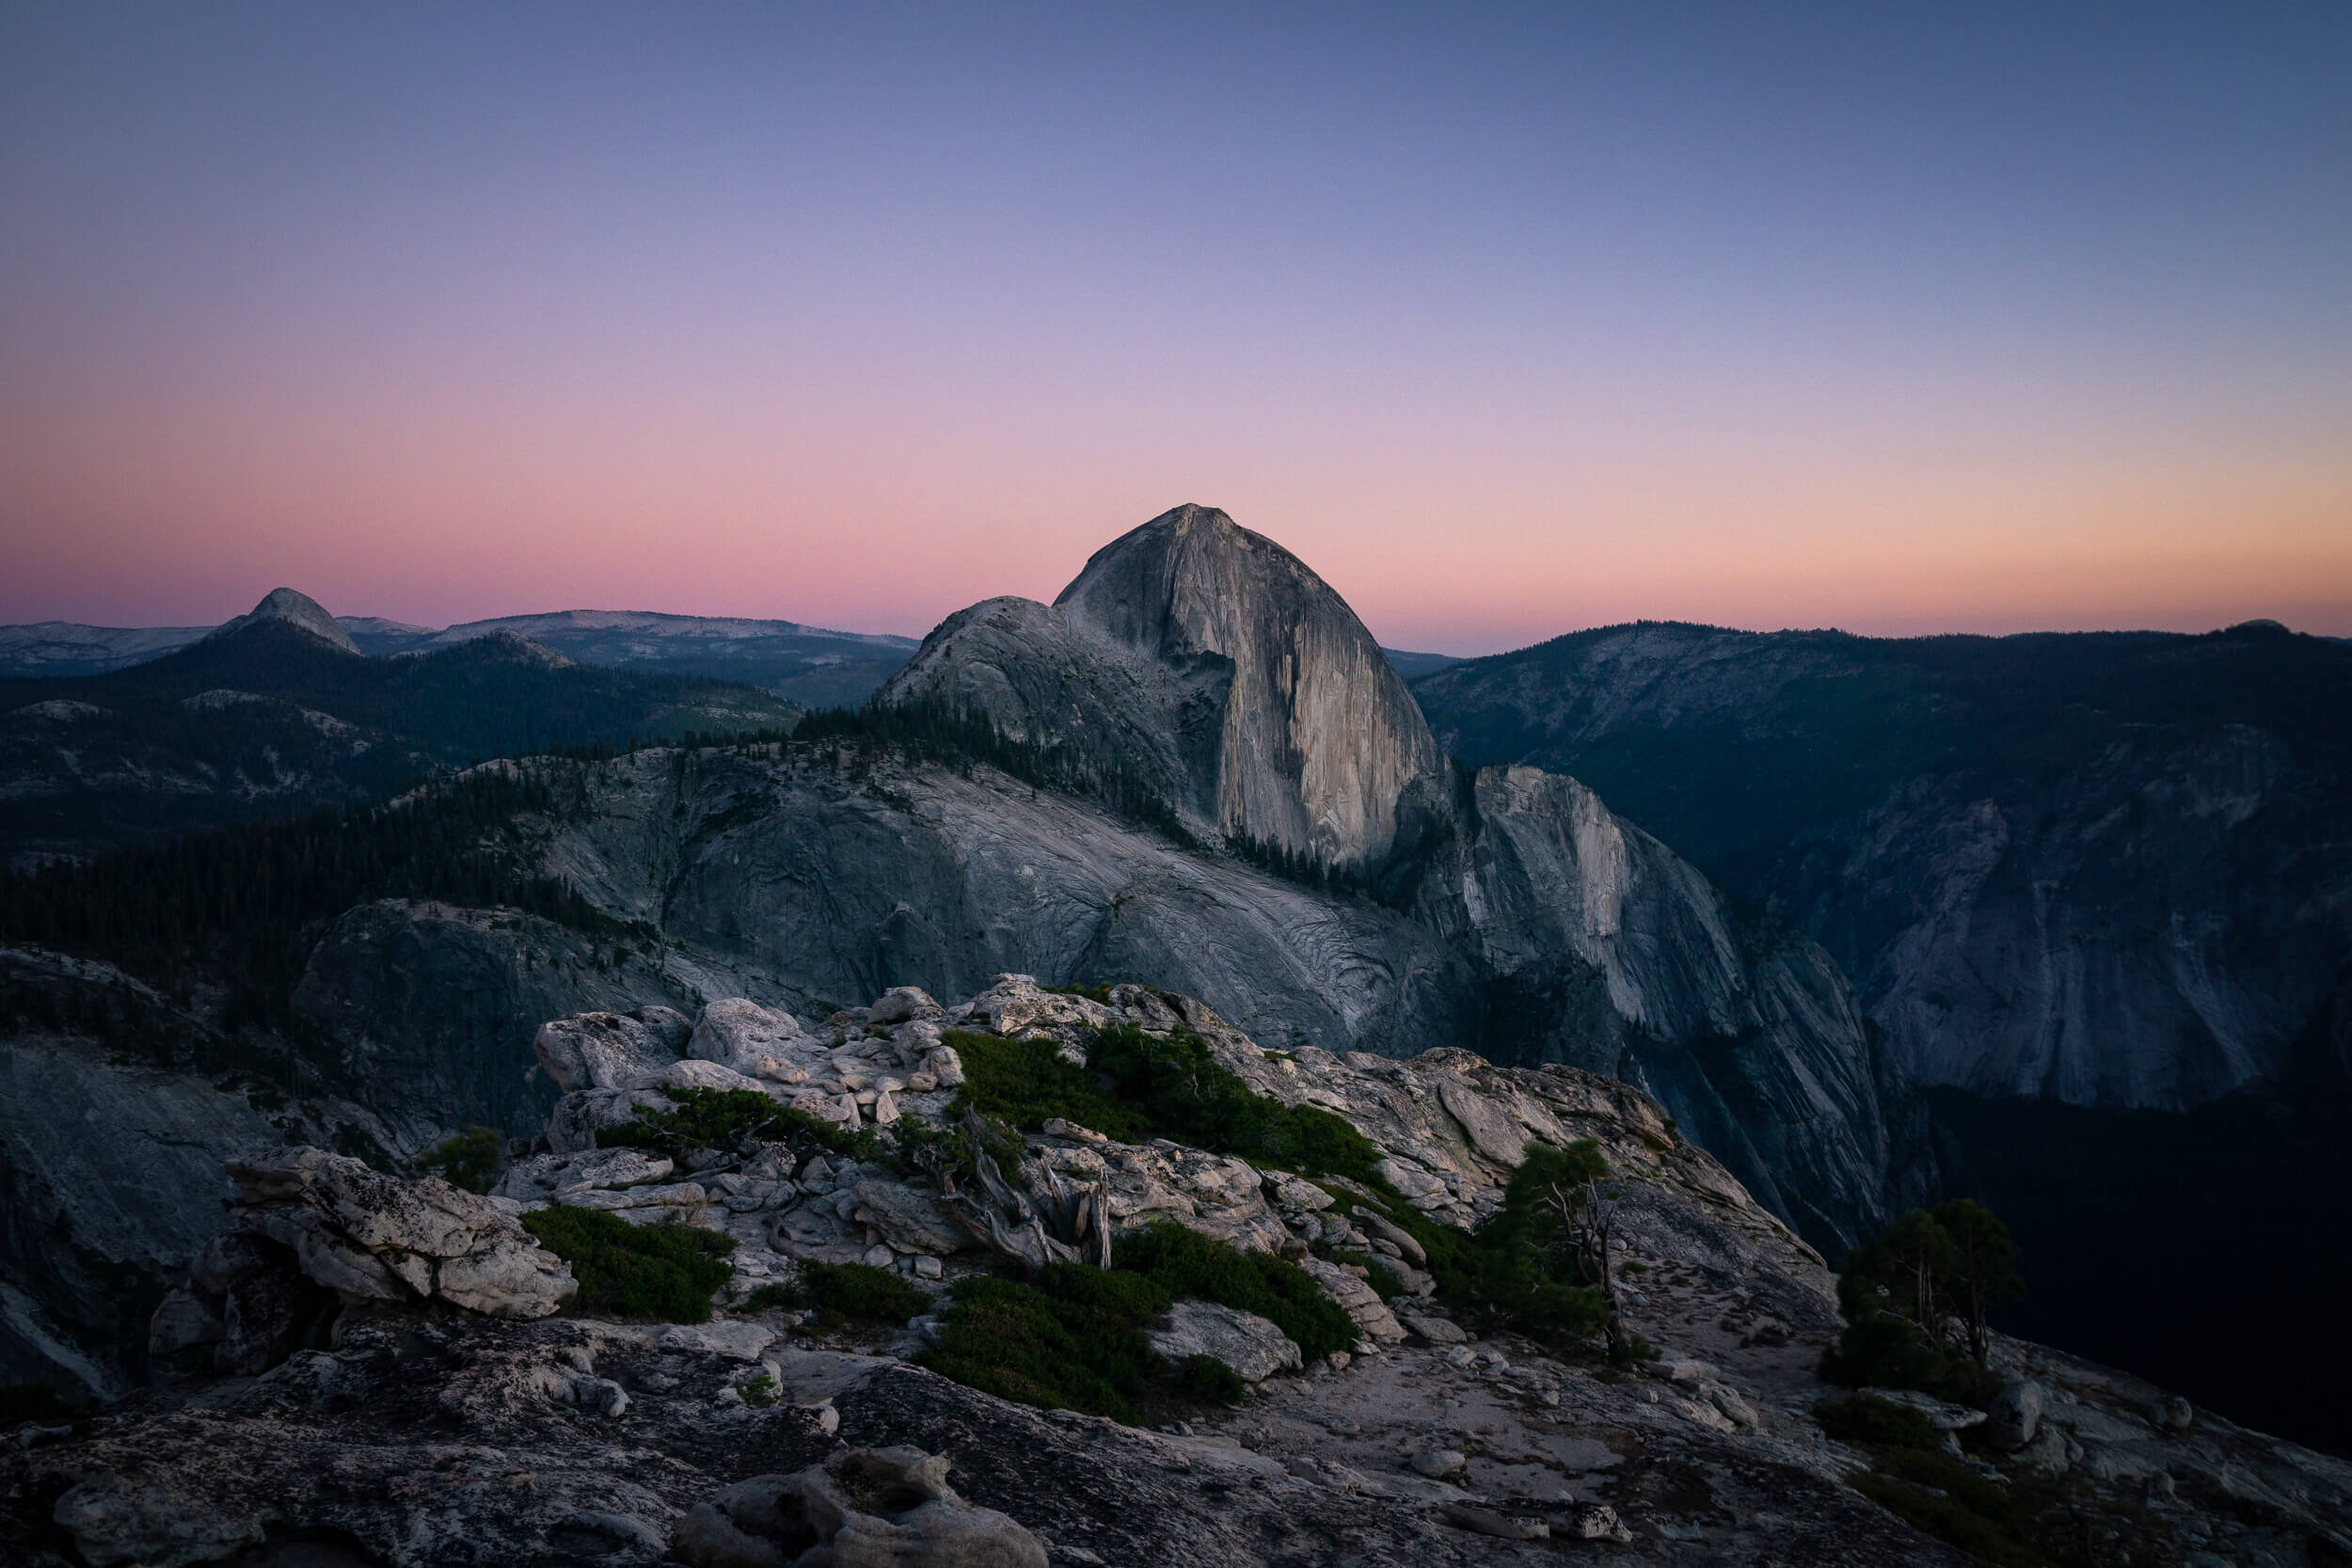 Sunset views of Half Dome from Mount Watkins.